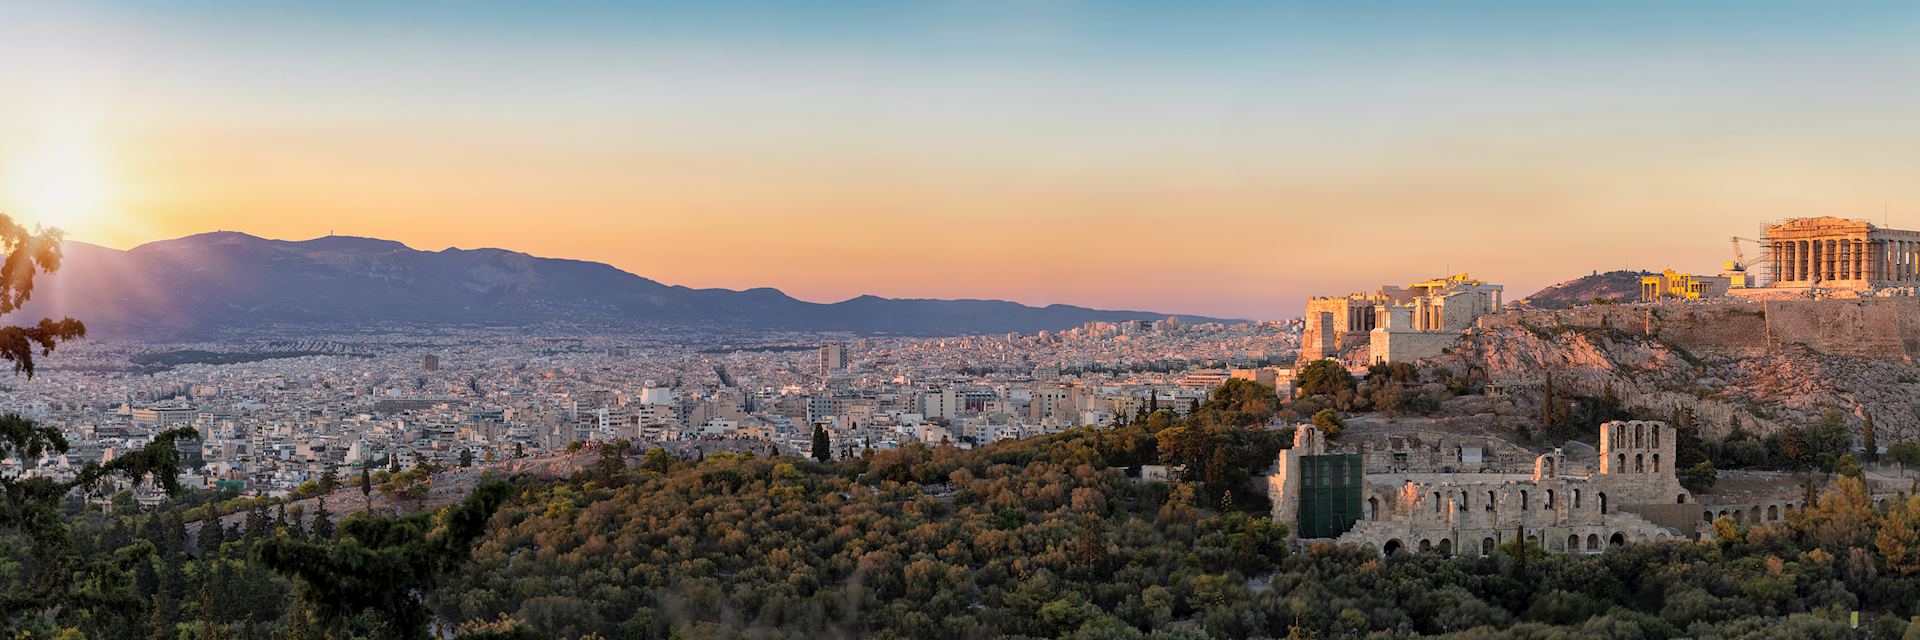 Panorama from the Parthenon and Acropolis to the skyline of Athens